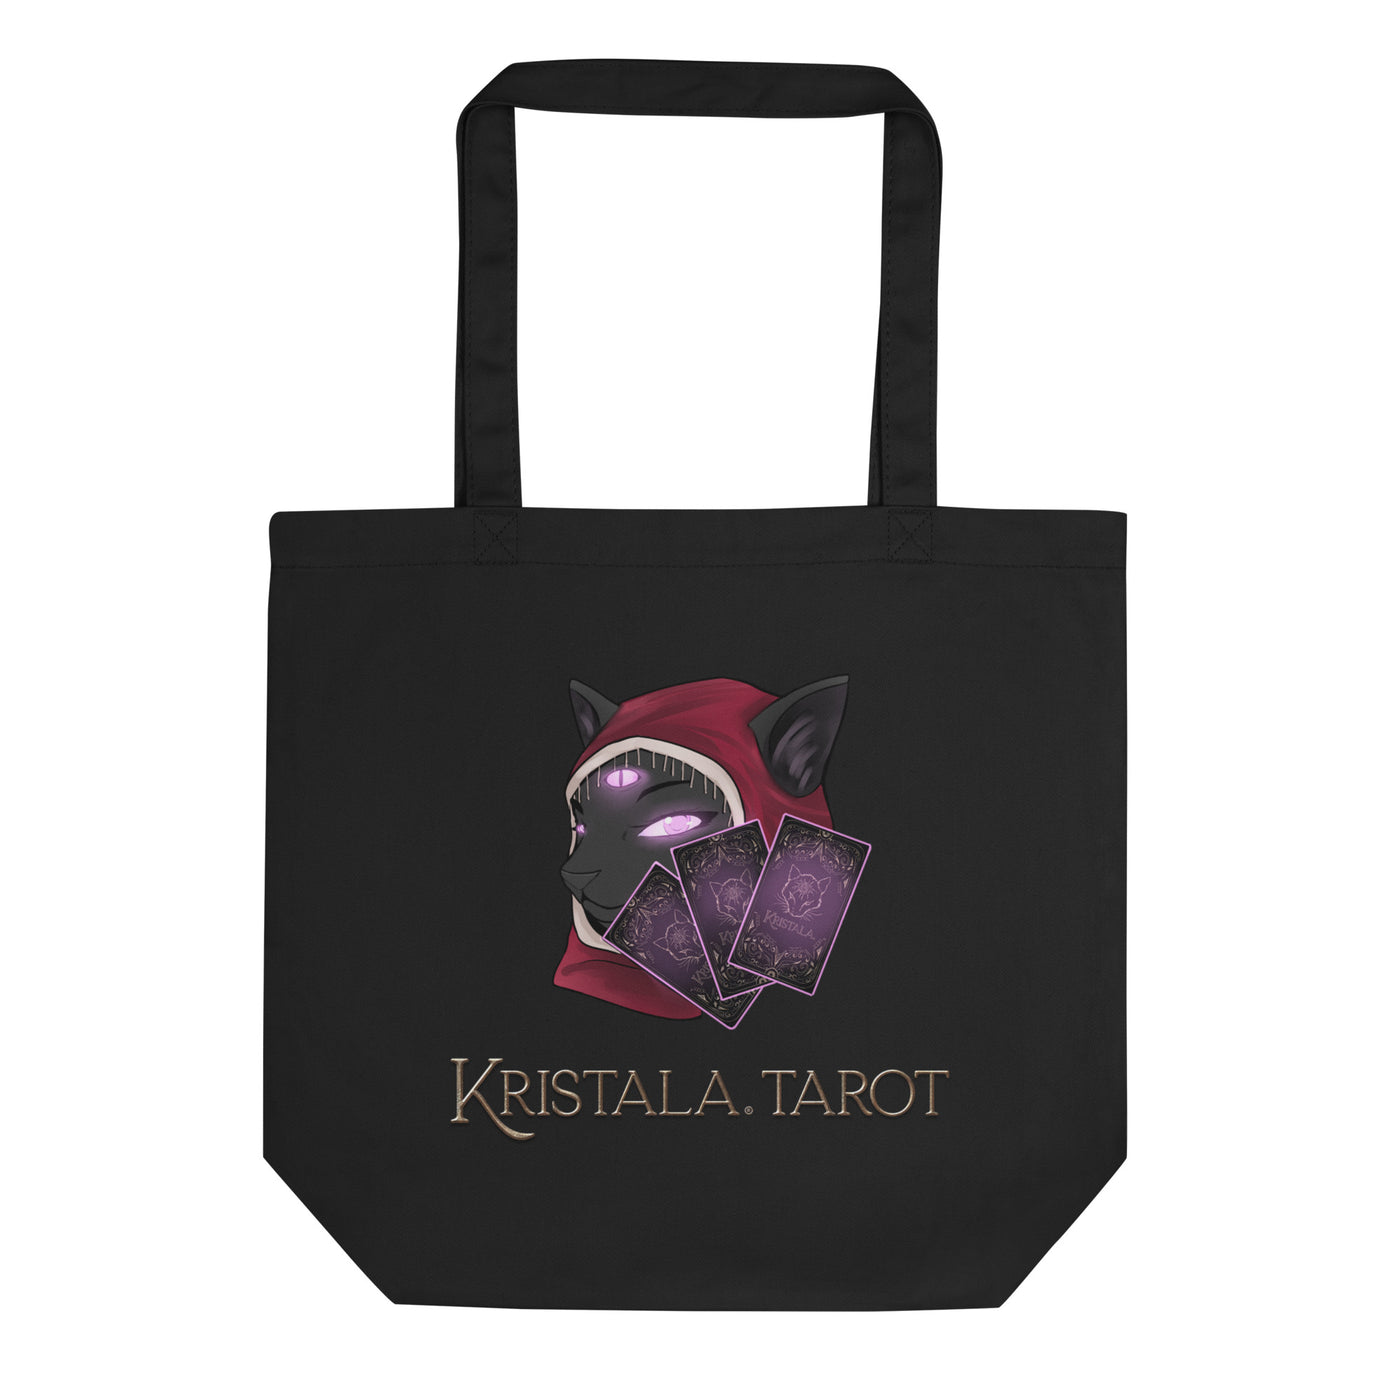 front view of black canvas tote bag with kristala tarot inaze the cardkeeper tarot card design and kristala tarot logo white background